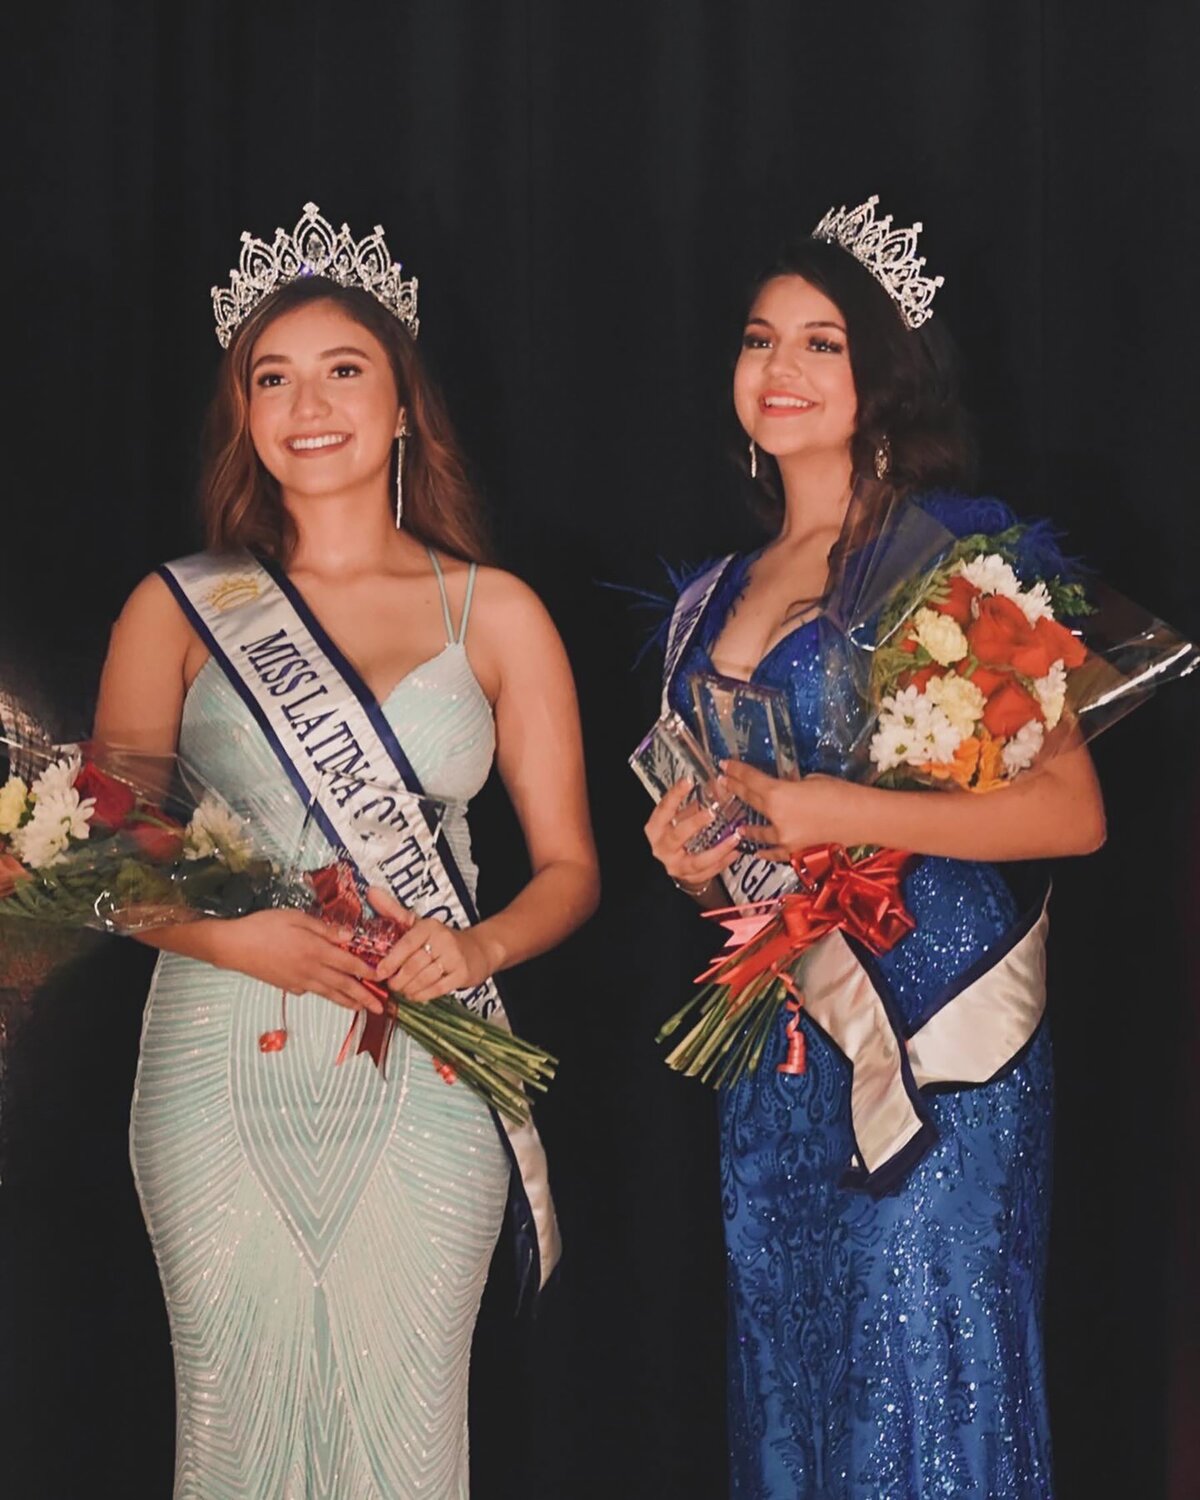 Salome Ortiz was crowned Glades Miss Latina (left), and Hilary Byers was crowned Glades Miss Teen Latina (right) On Dec. 3, 2023.